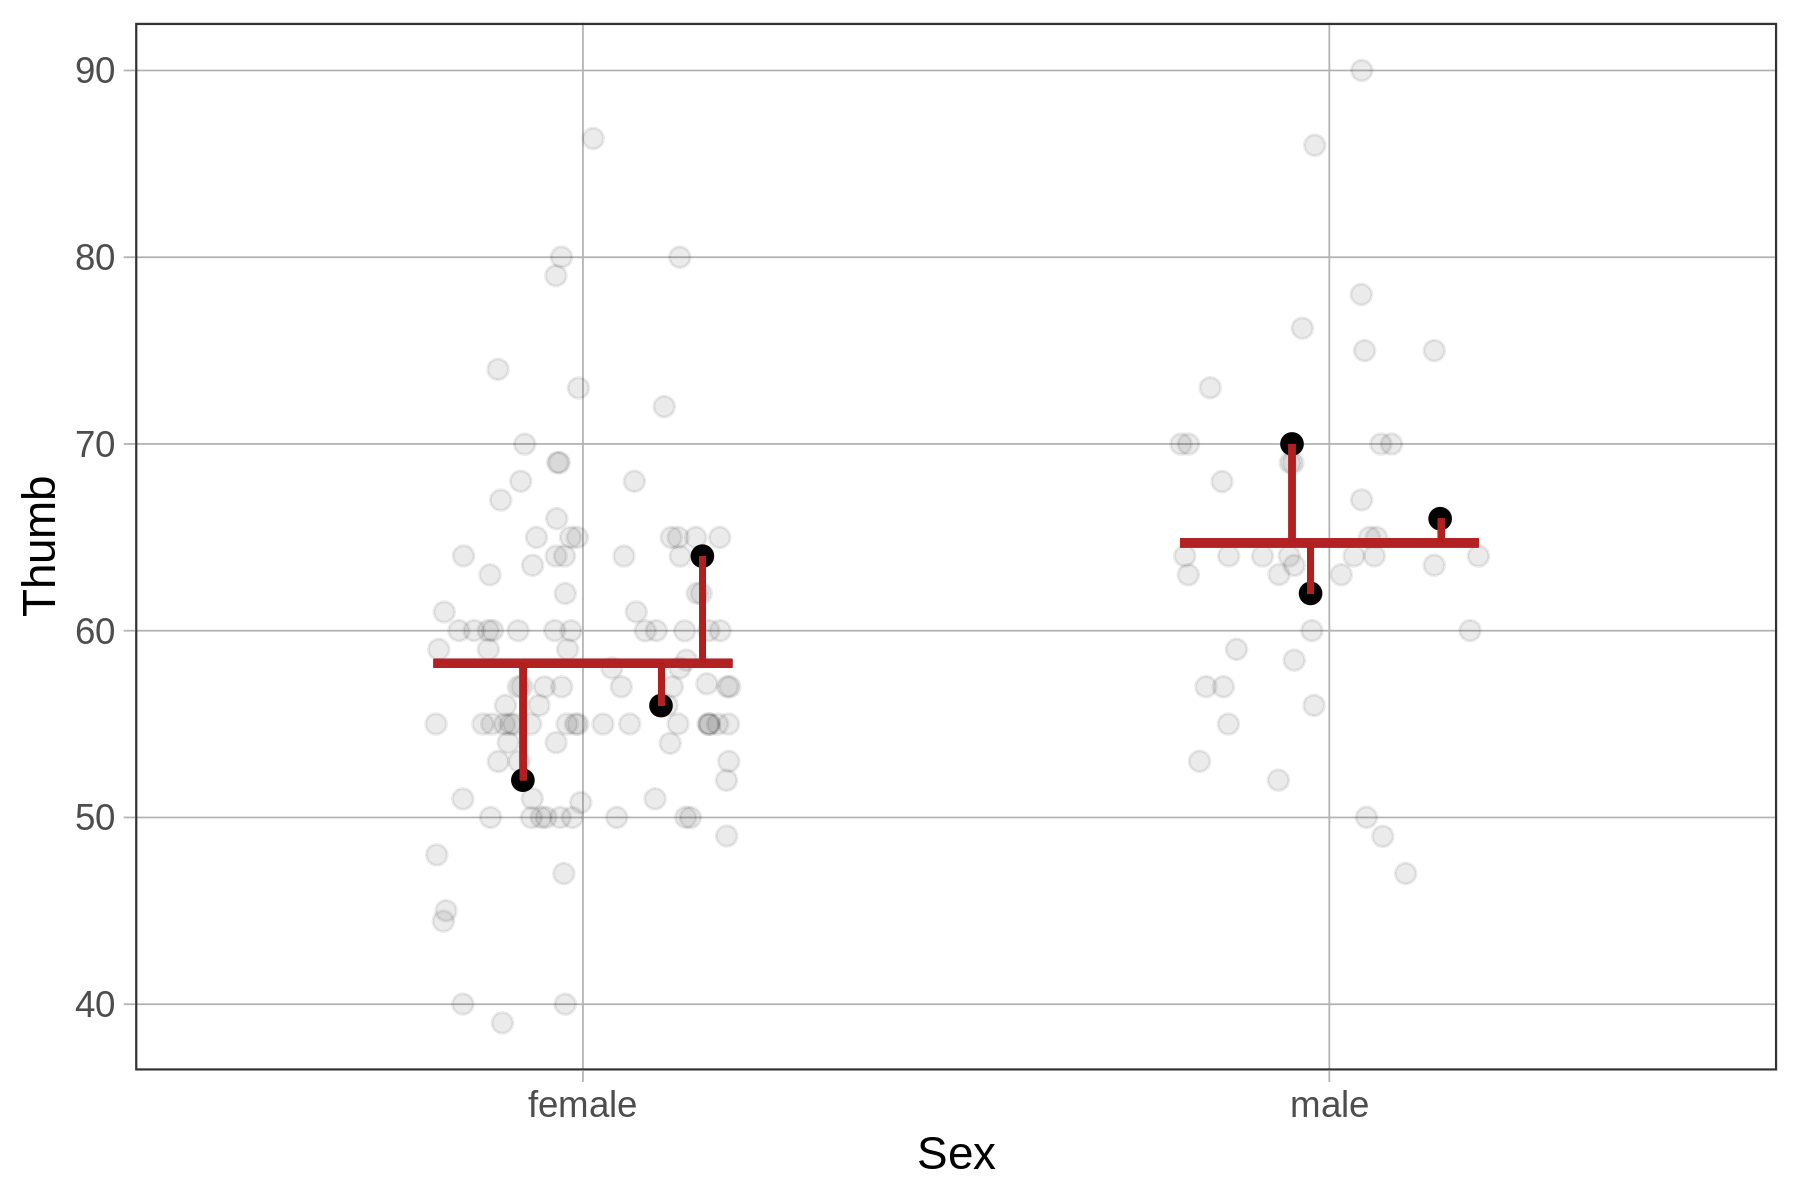 On the right, a jitter plot of the distribution of Thumb by Sex, overlaid with a red horizontal line in each group showing the group mean. The residuals of the same few data points from the jitter plot on the left are drawn above and below the mean lines as vertical lines from the data points to the mean lines. The plot caption reads: Residuals from the Sex model.